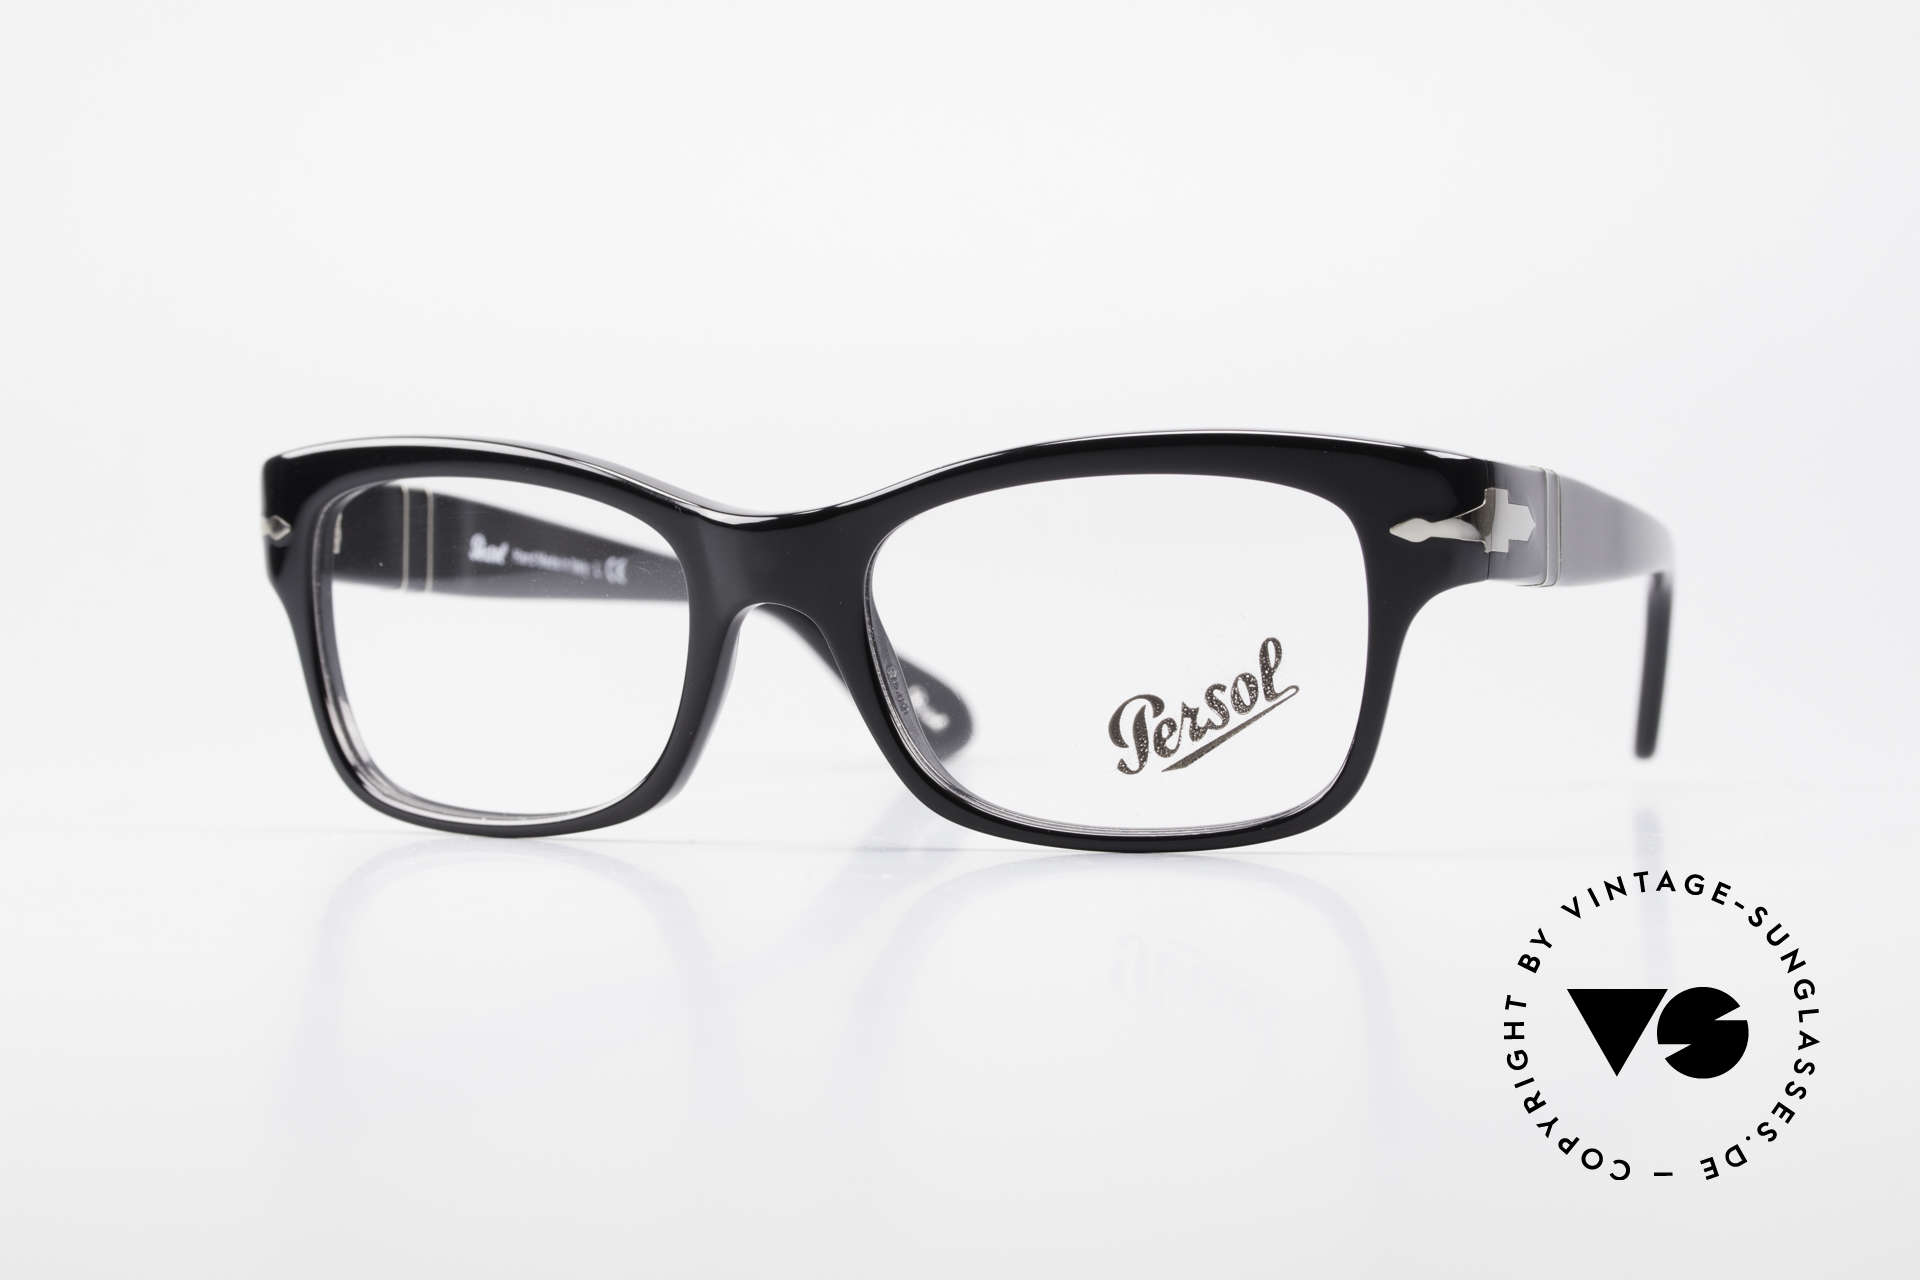 Persol 3054 Vintage Glasses Classic Frame, very elegant Persol eyeglass-frame from Italy, Made for Men and Women